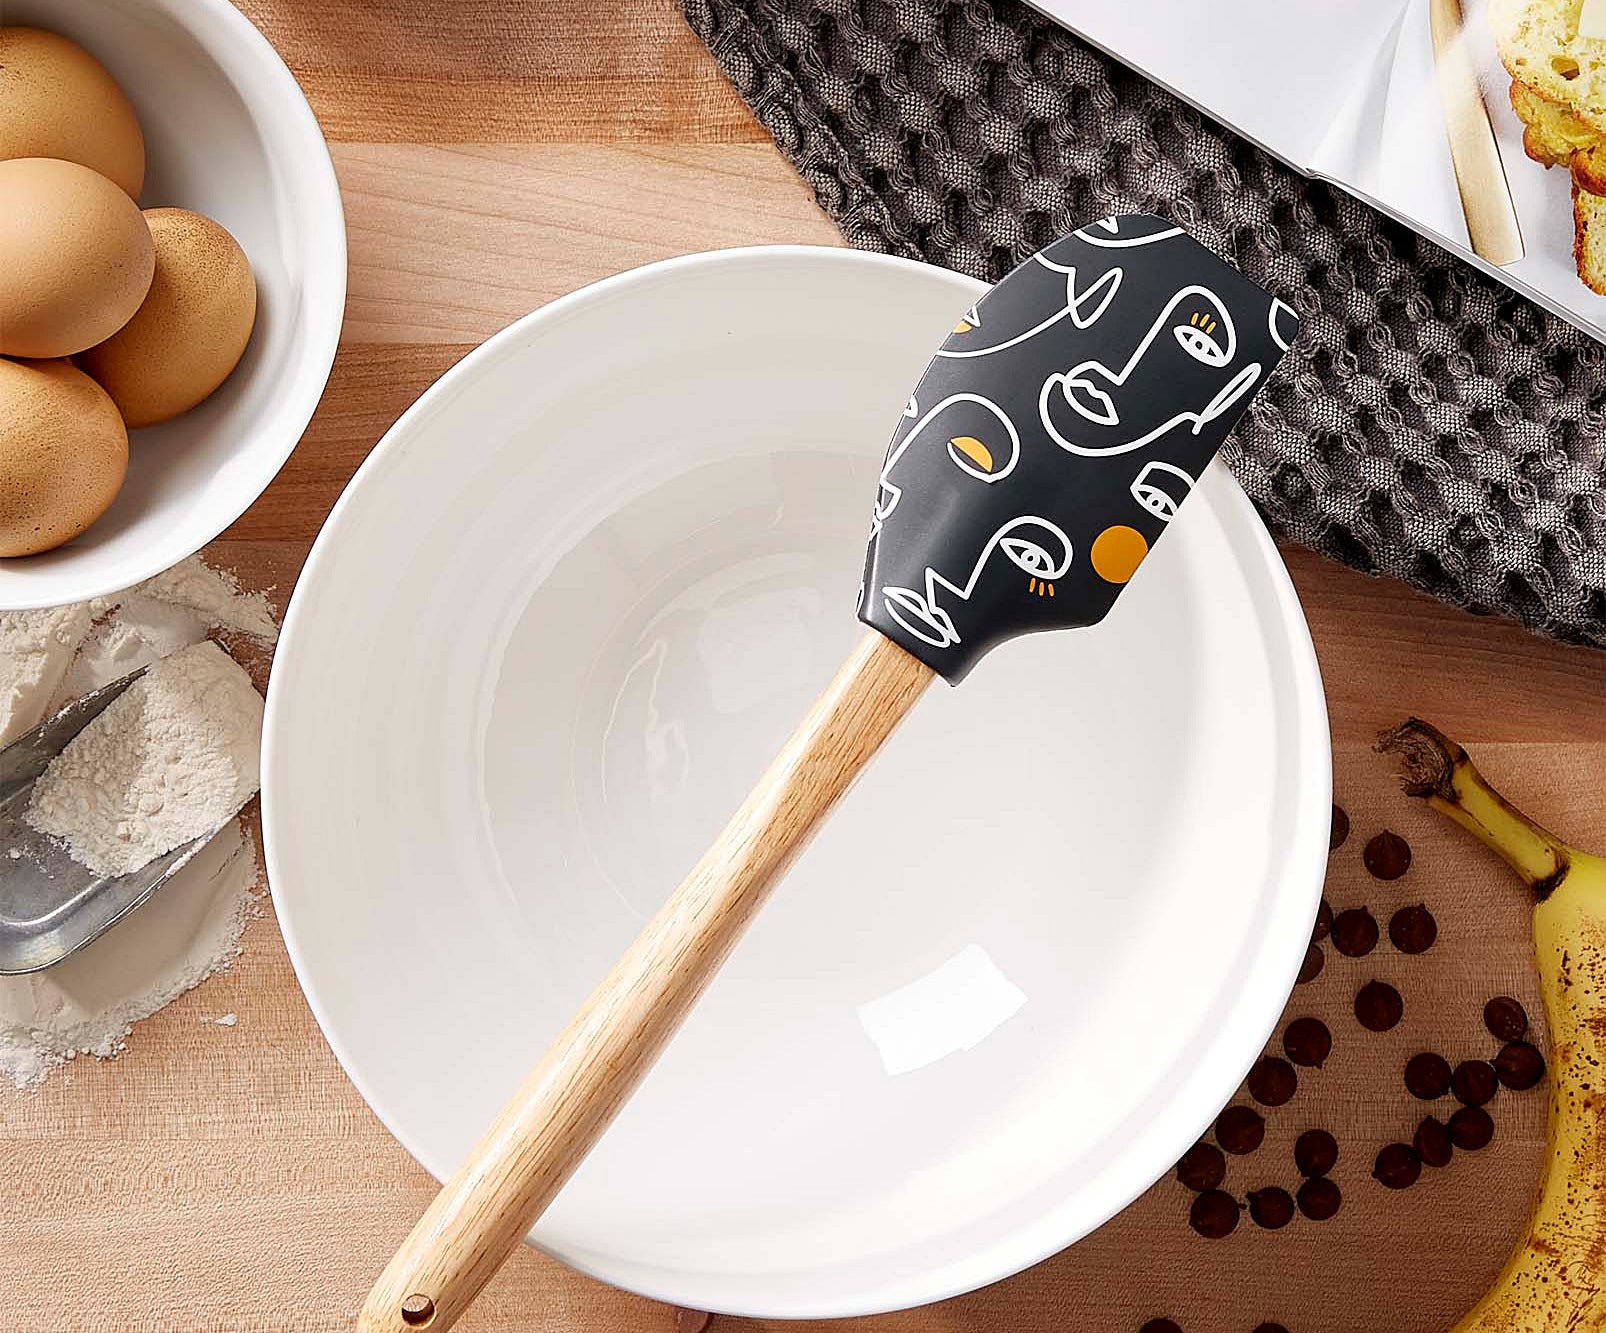 A spatula sitting on top of a large empty mixing bowl